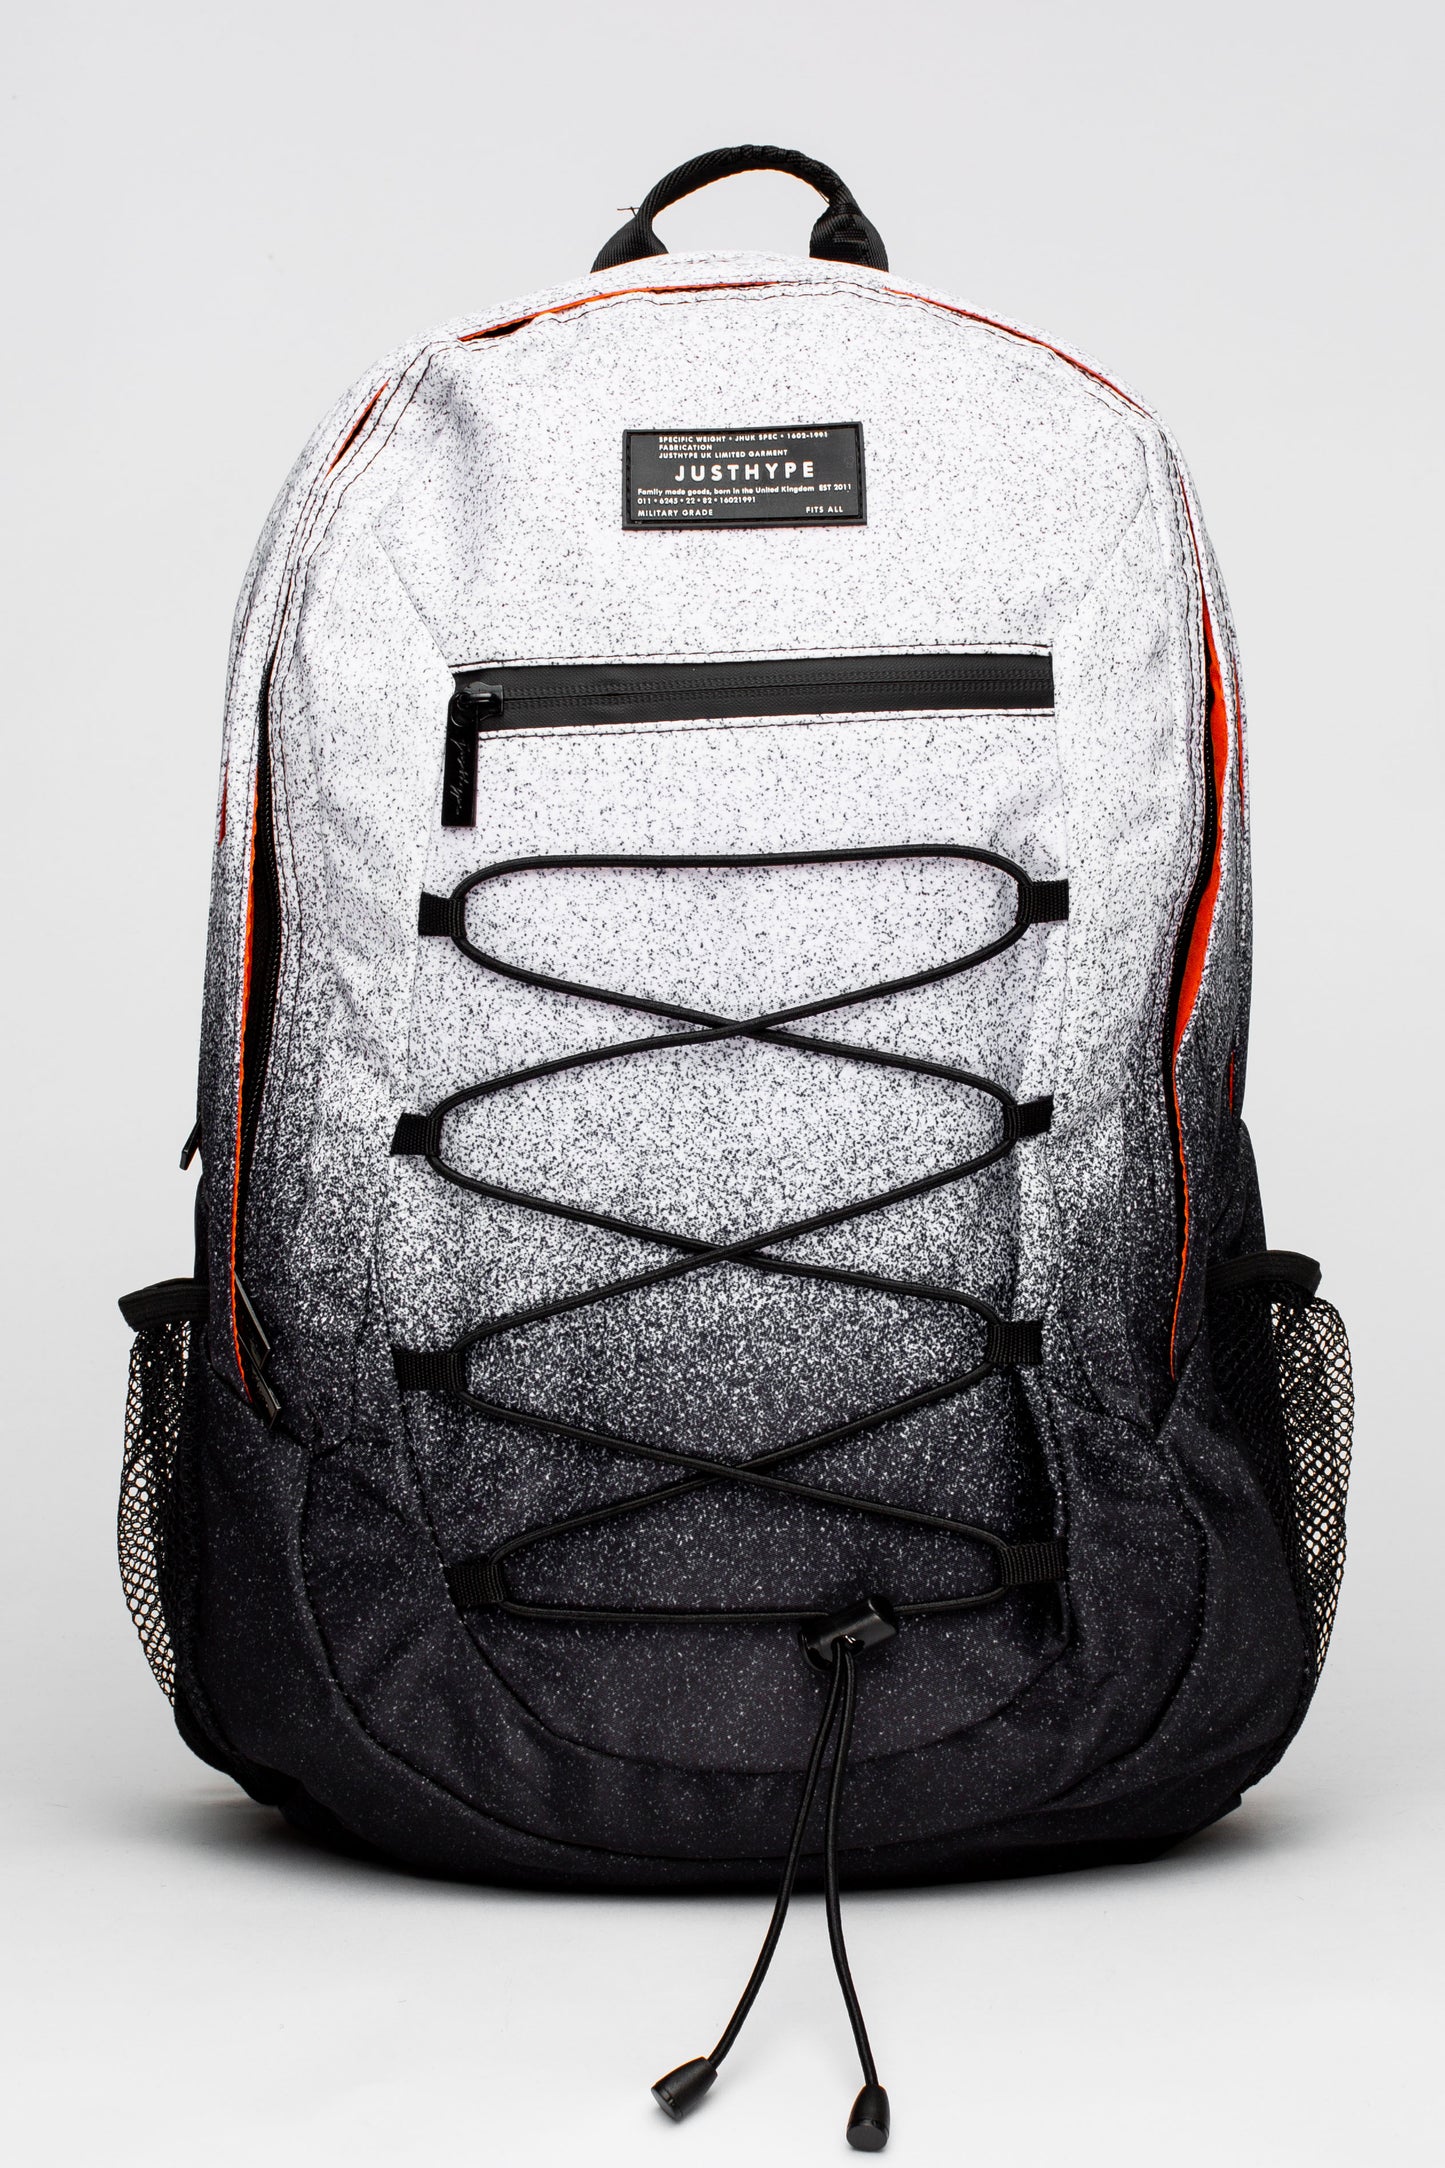 HYPE SPECKLE FADE MAXI BACKPACK